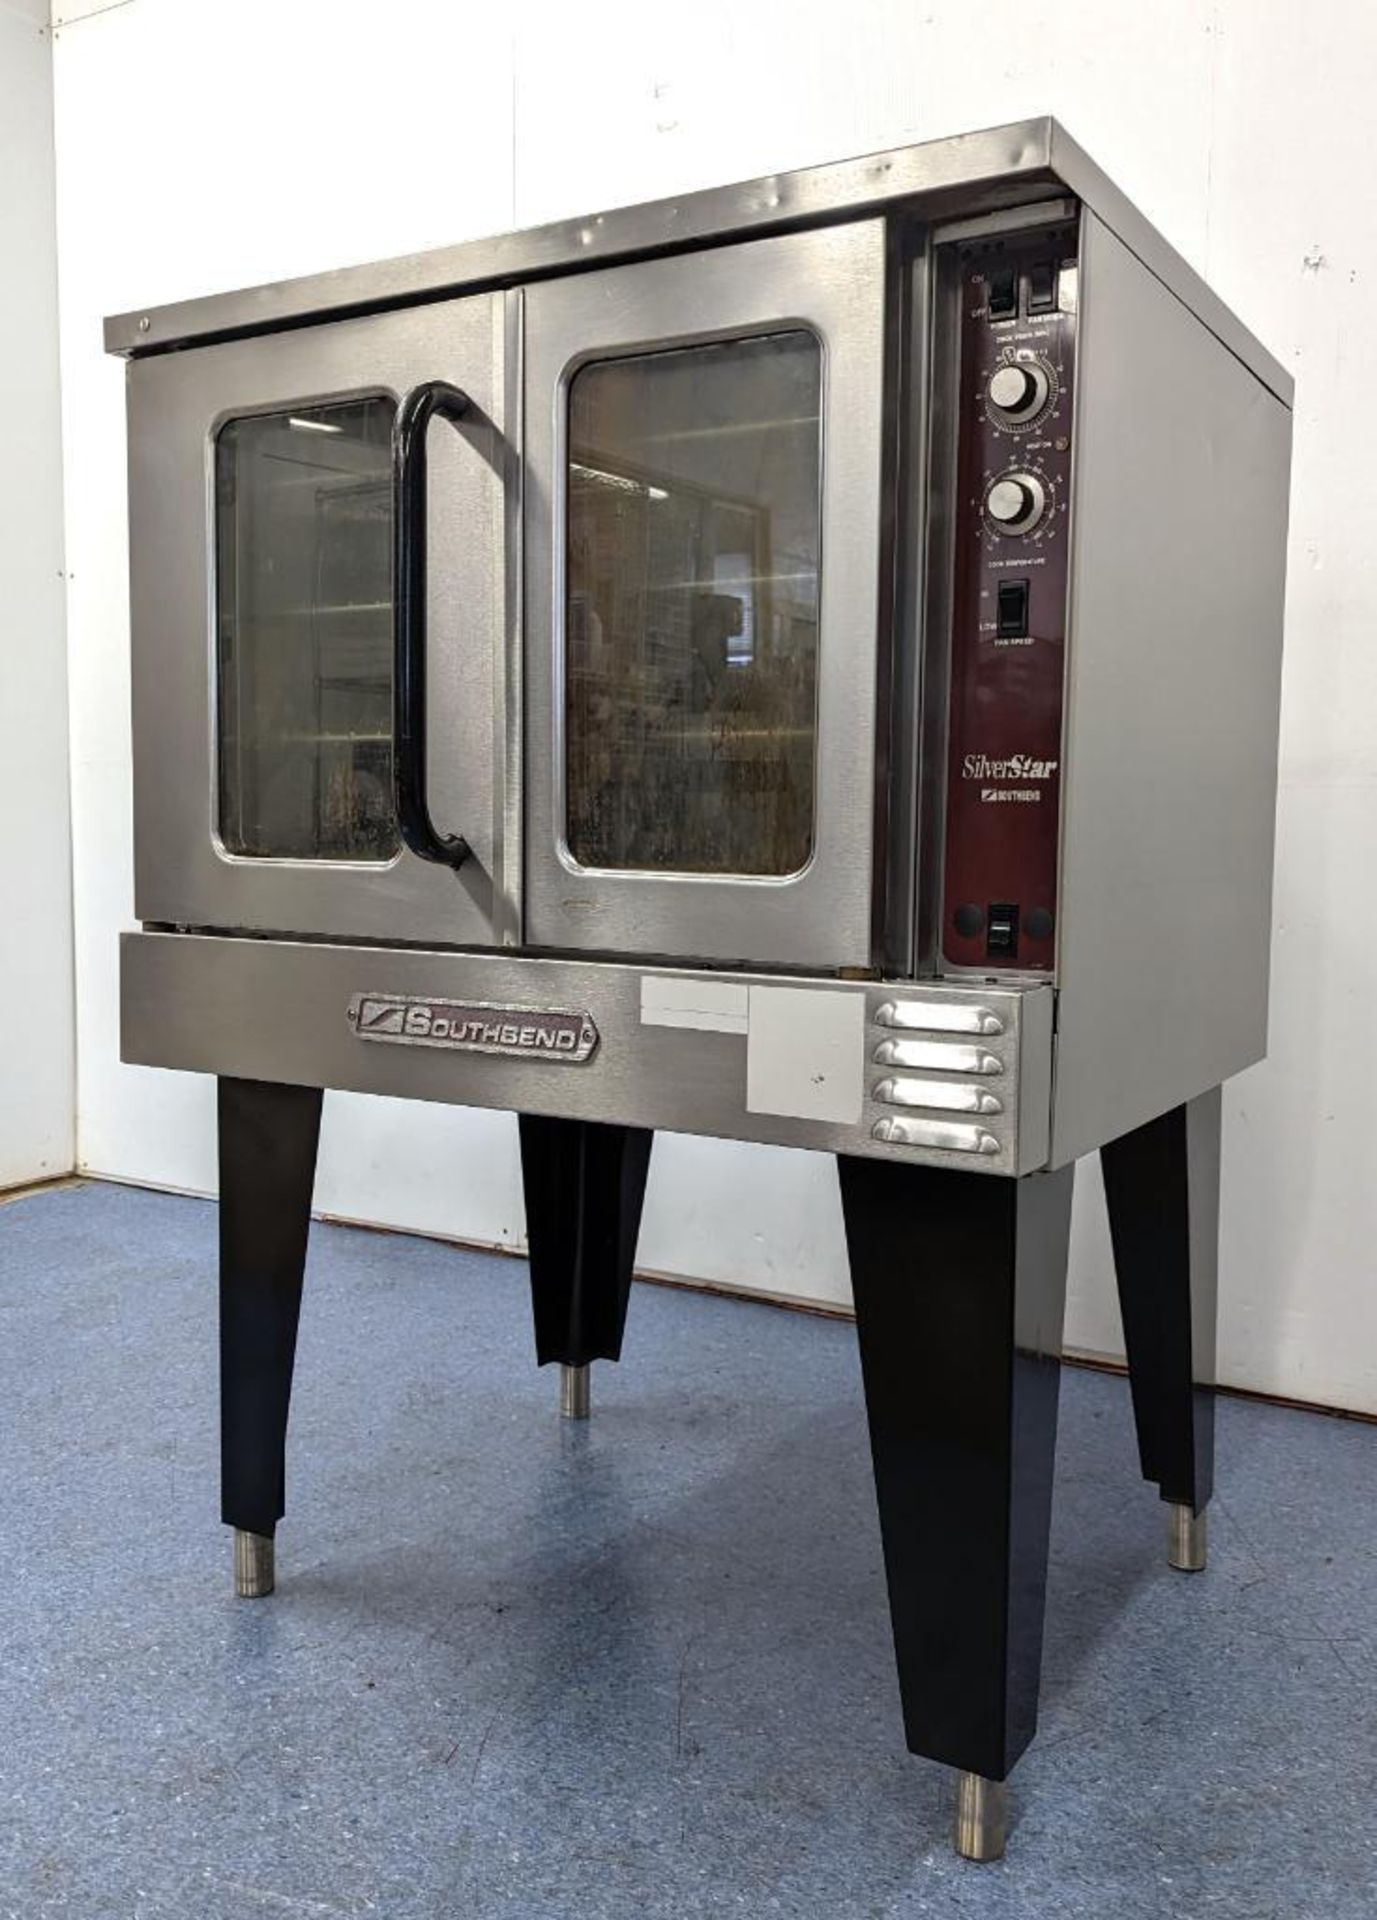 SOUTHBEND SLGS SILVERSTAR SINGLE FULL SIZE GAS CONVECTION OVEN - Image 2 of 11